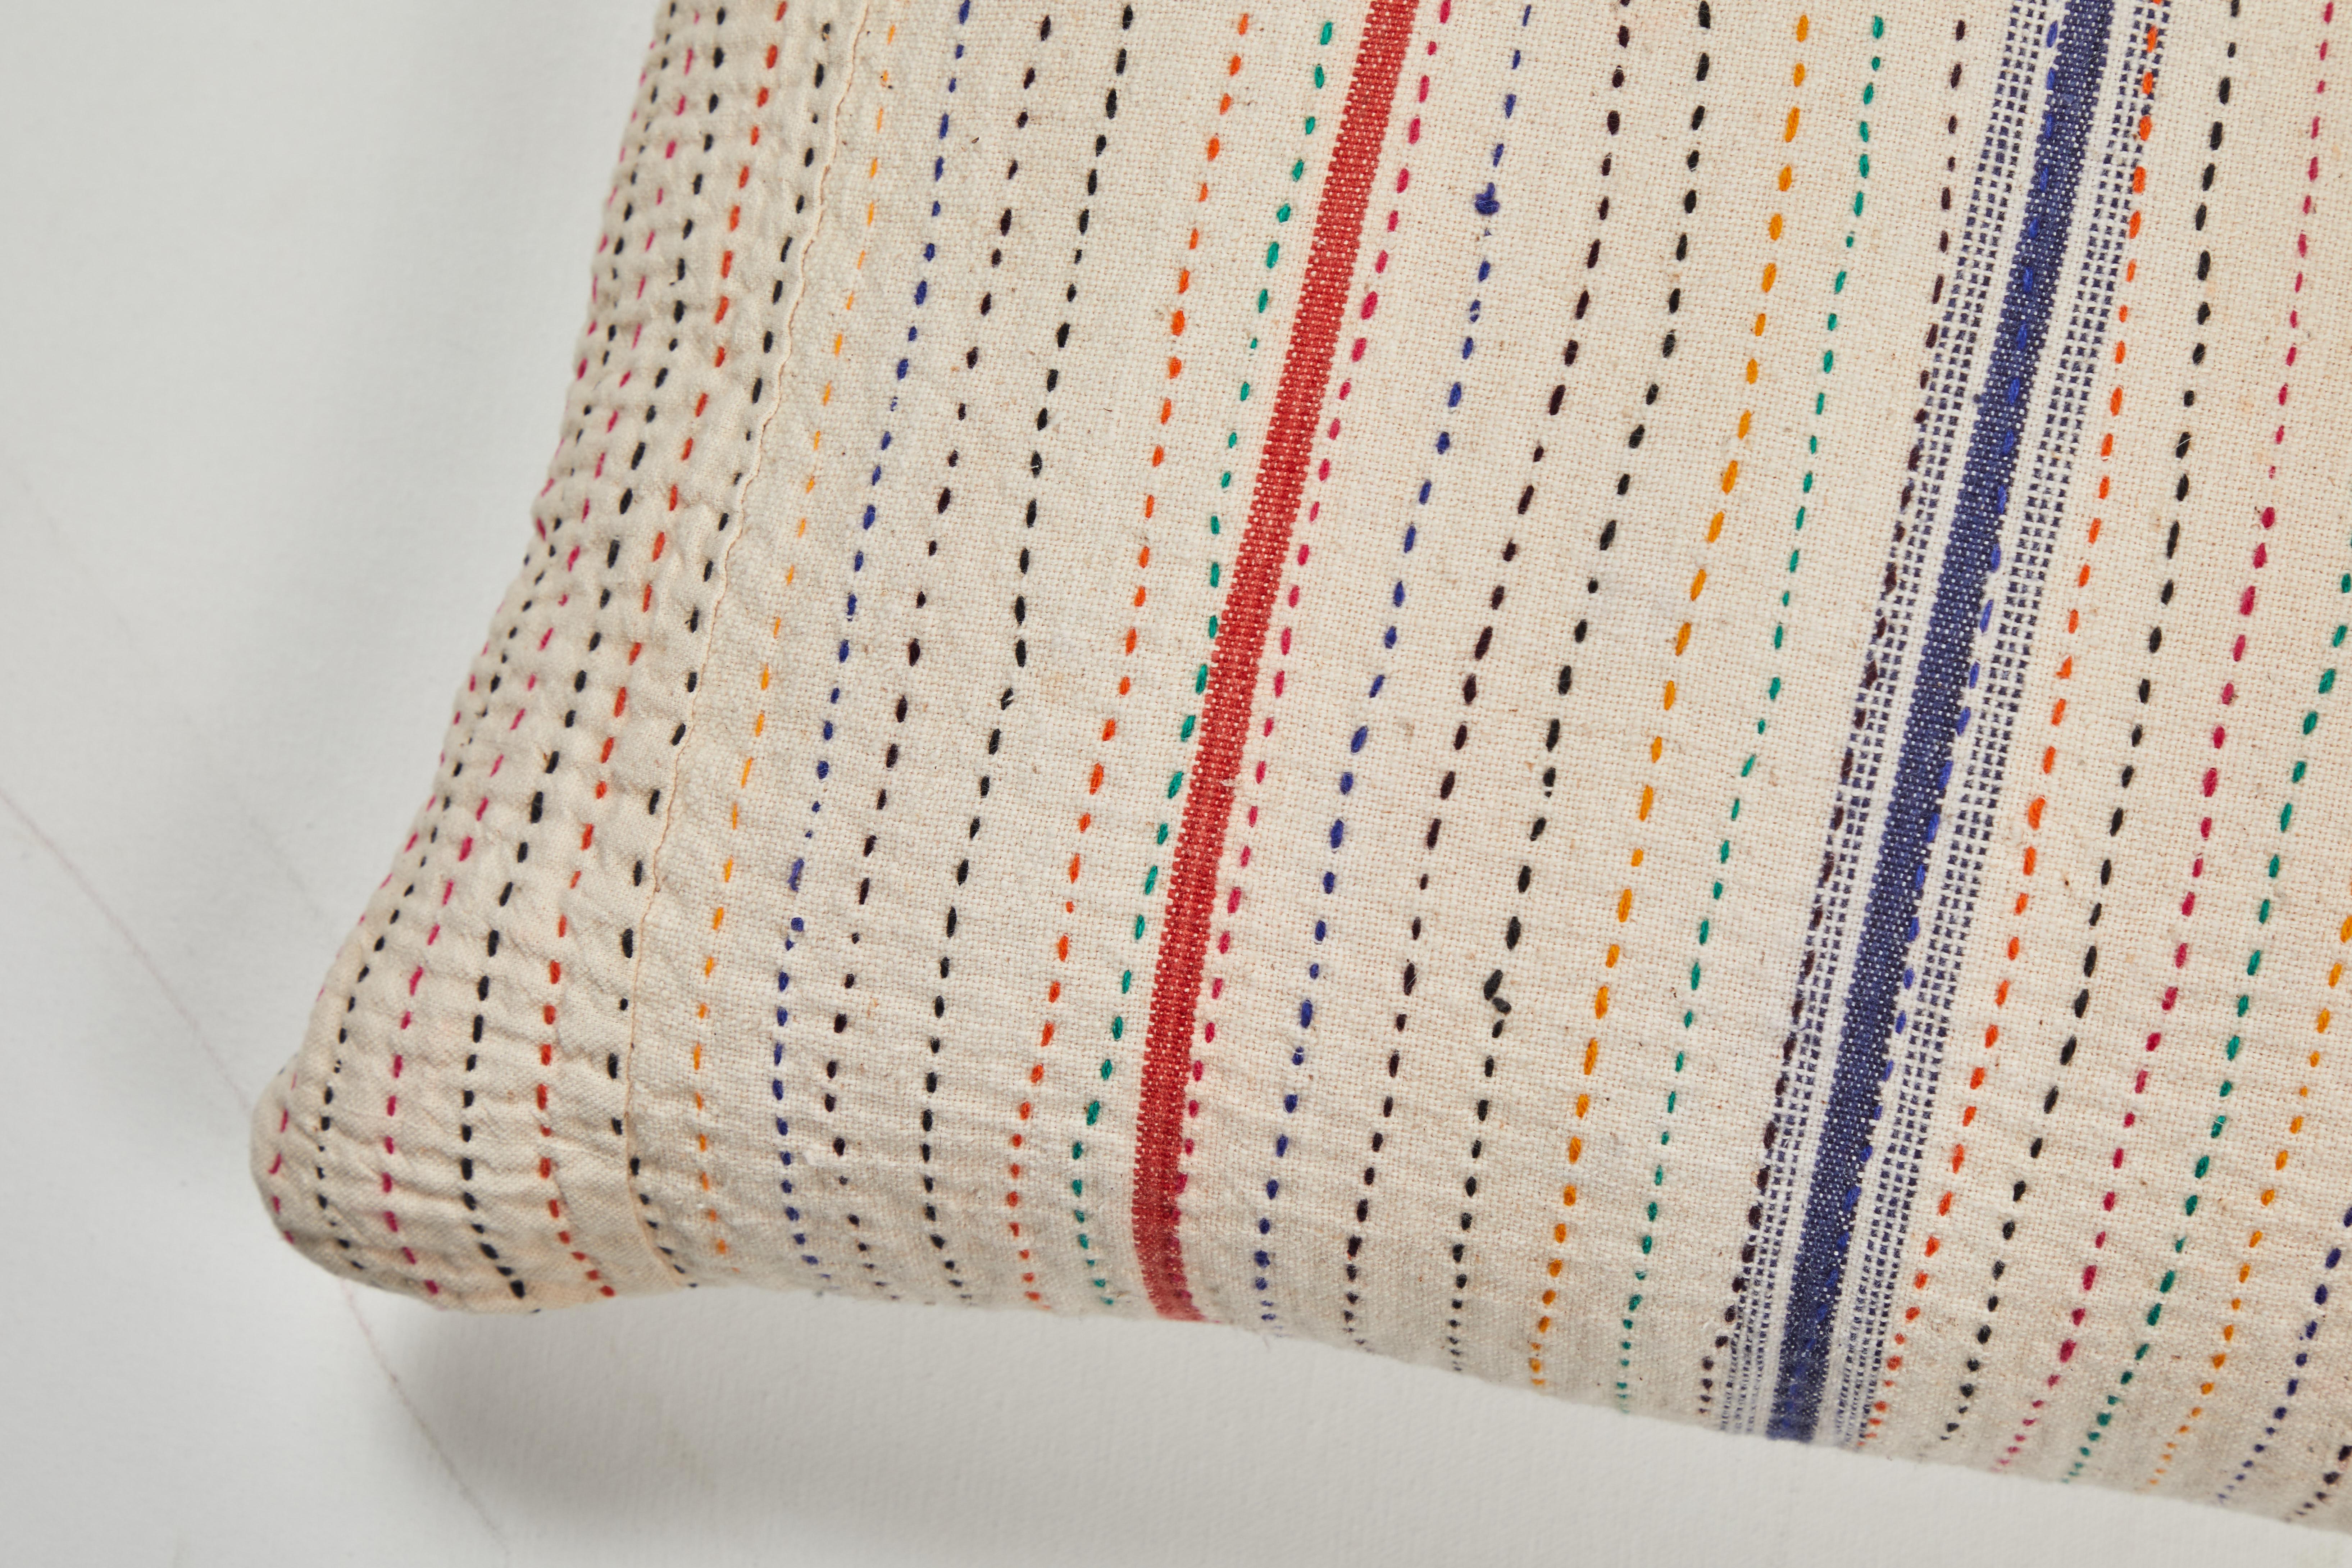 Vintage cotton canvas with multicolored quilting stitches. Natural linen back, invisible zipper closure and feather and down fill.